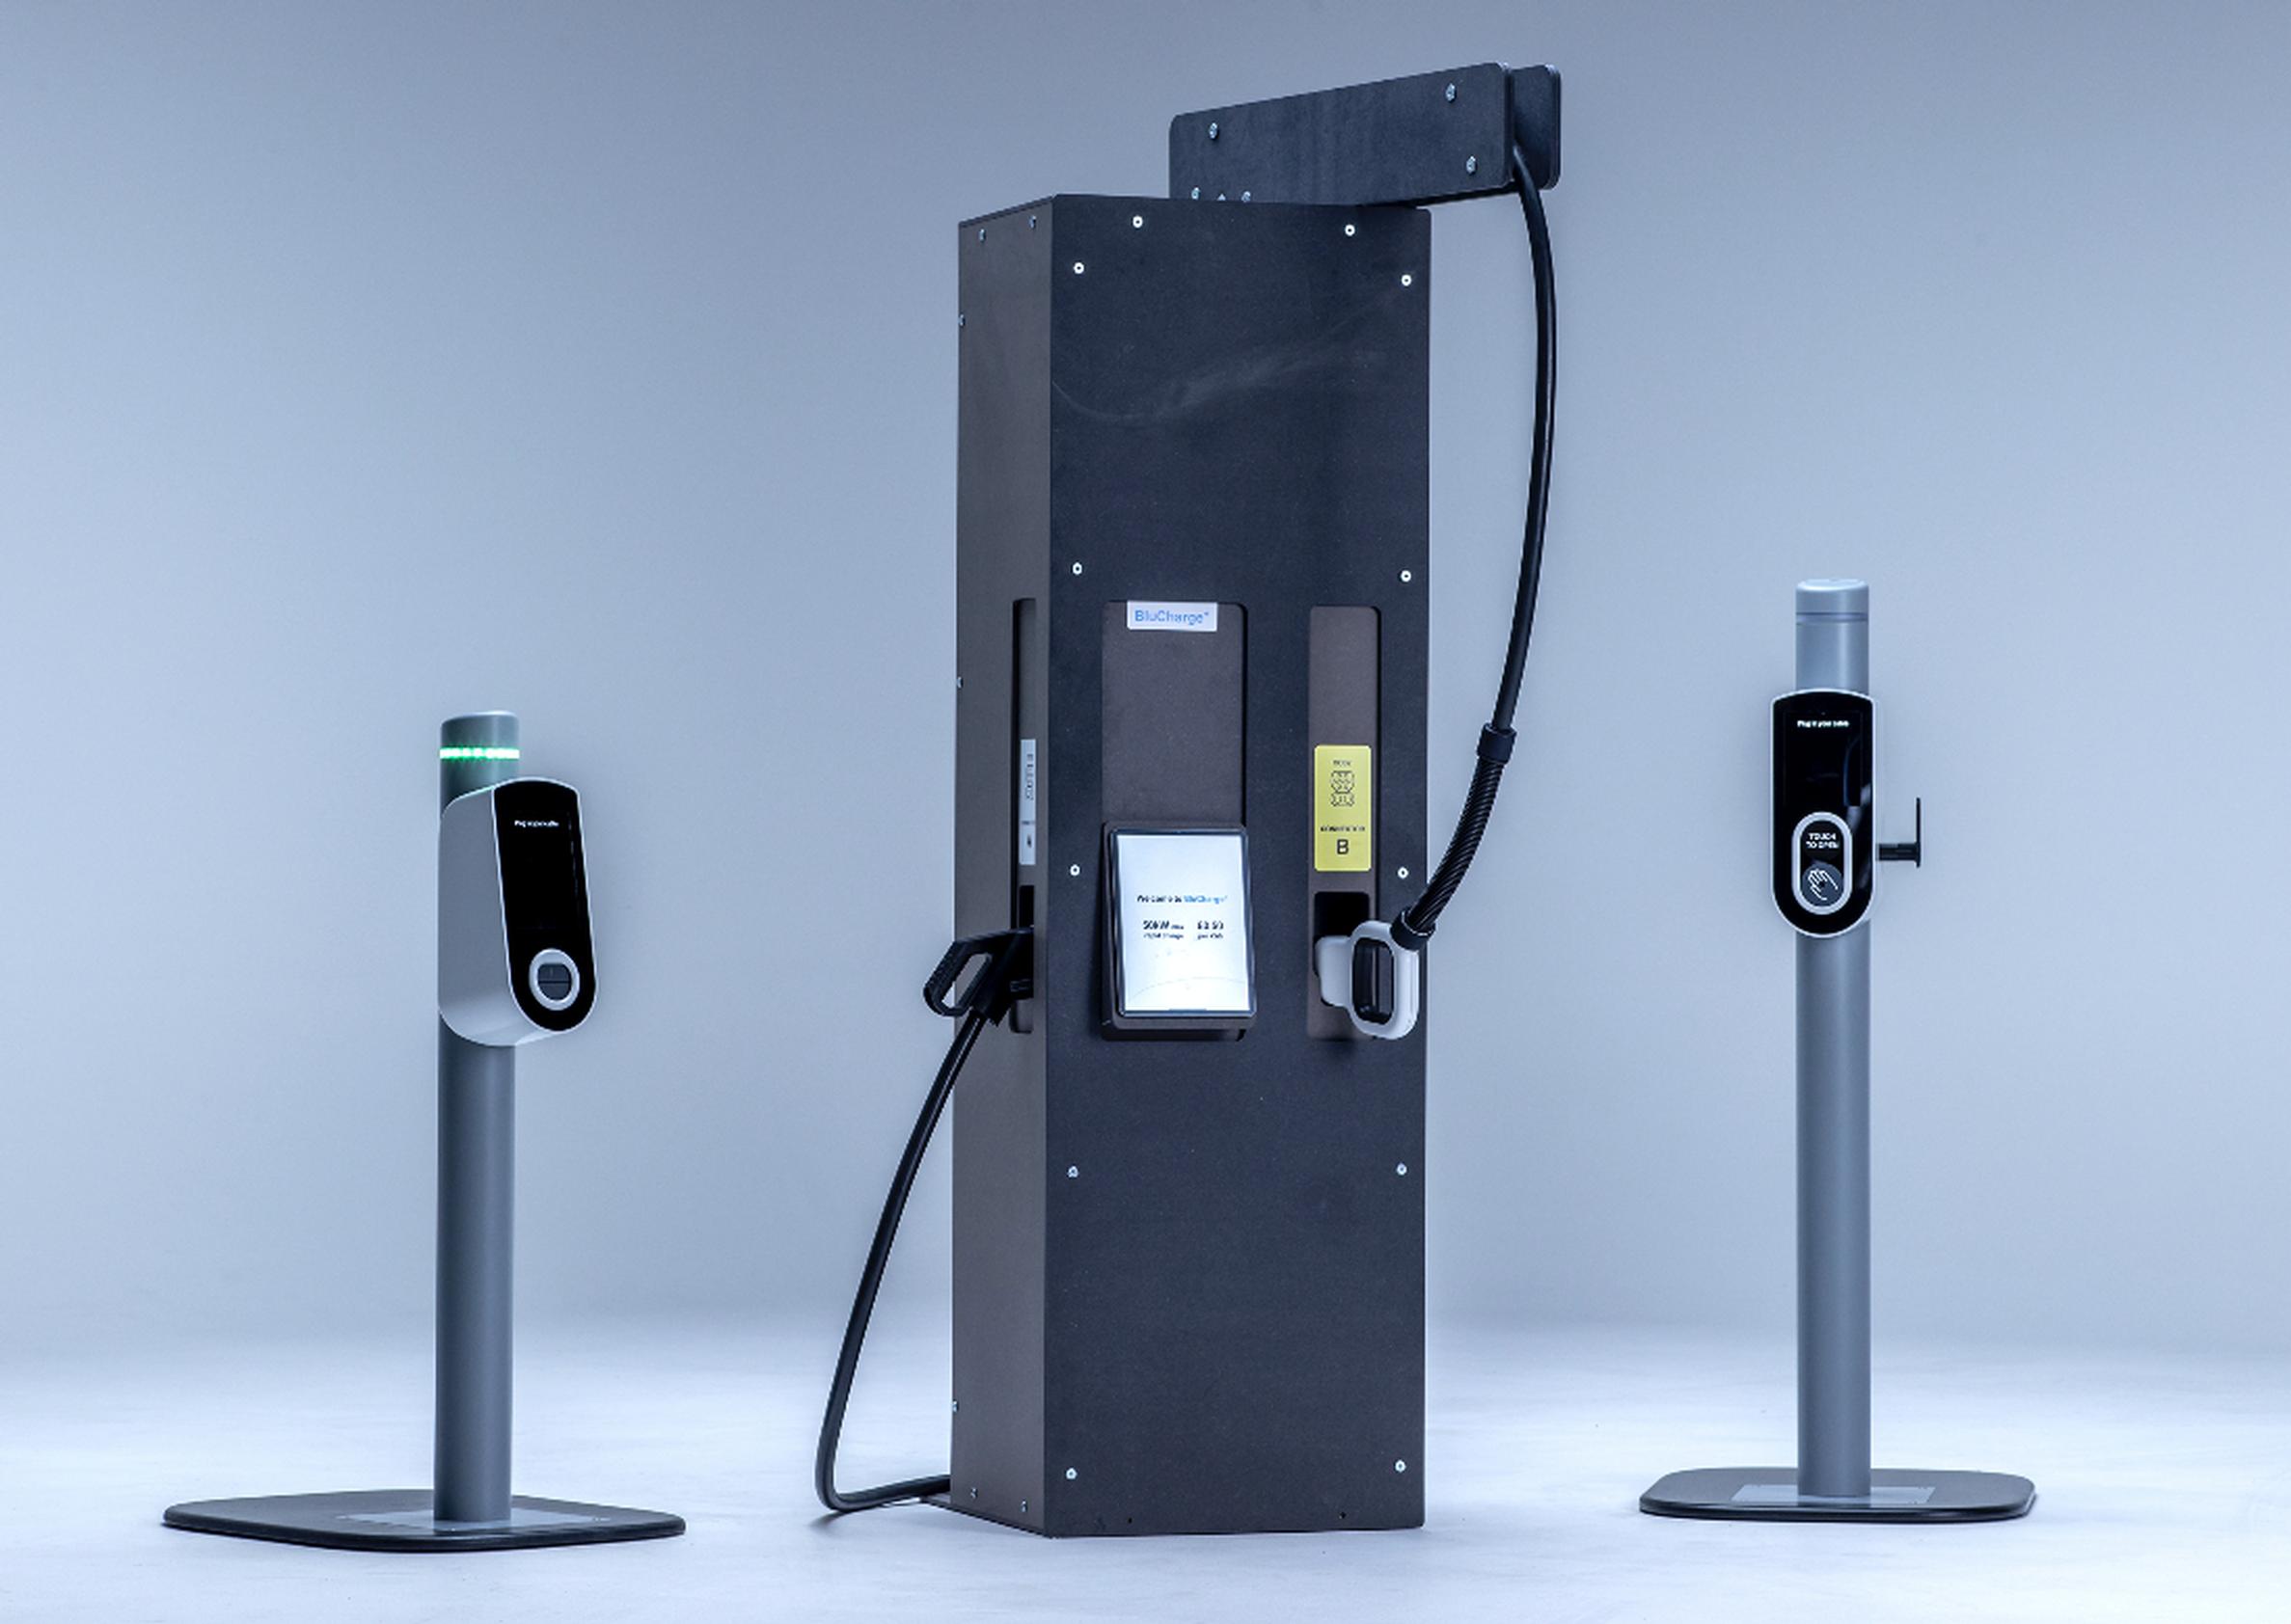 Three prototype accessible chargers have been developed